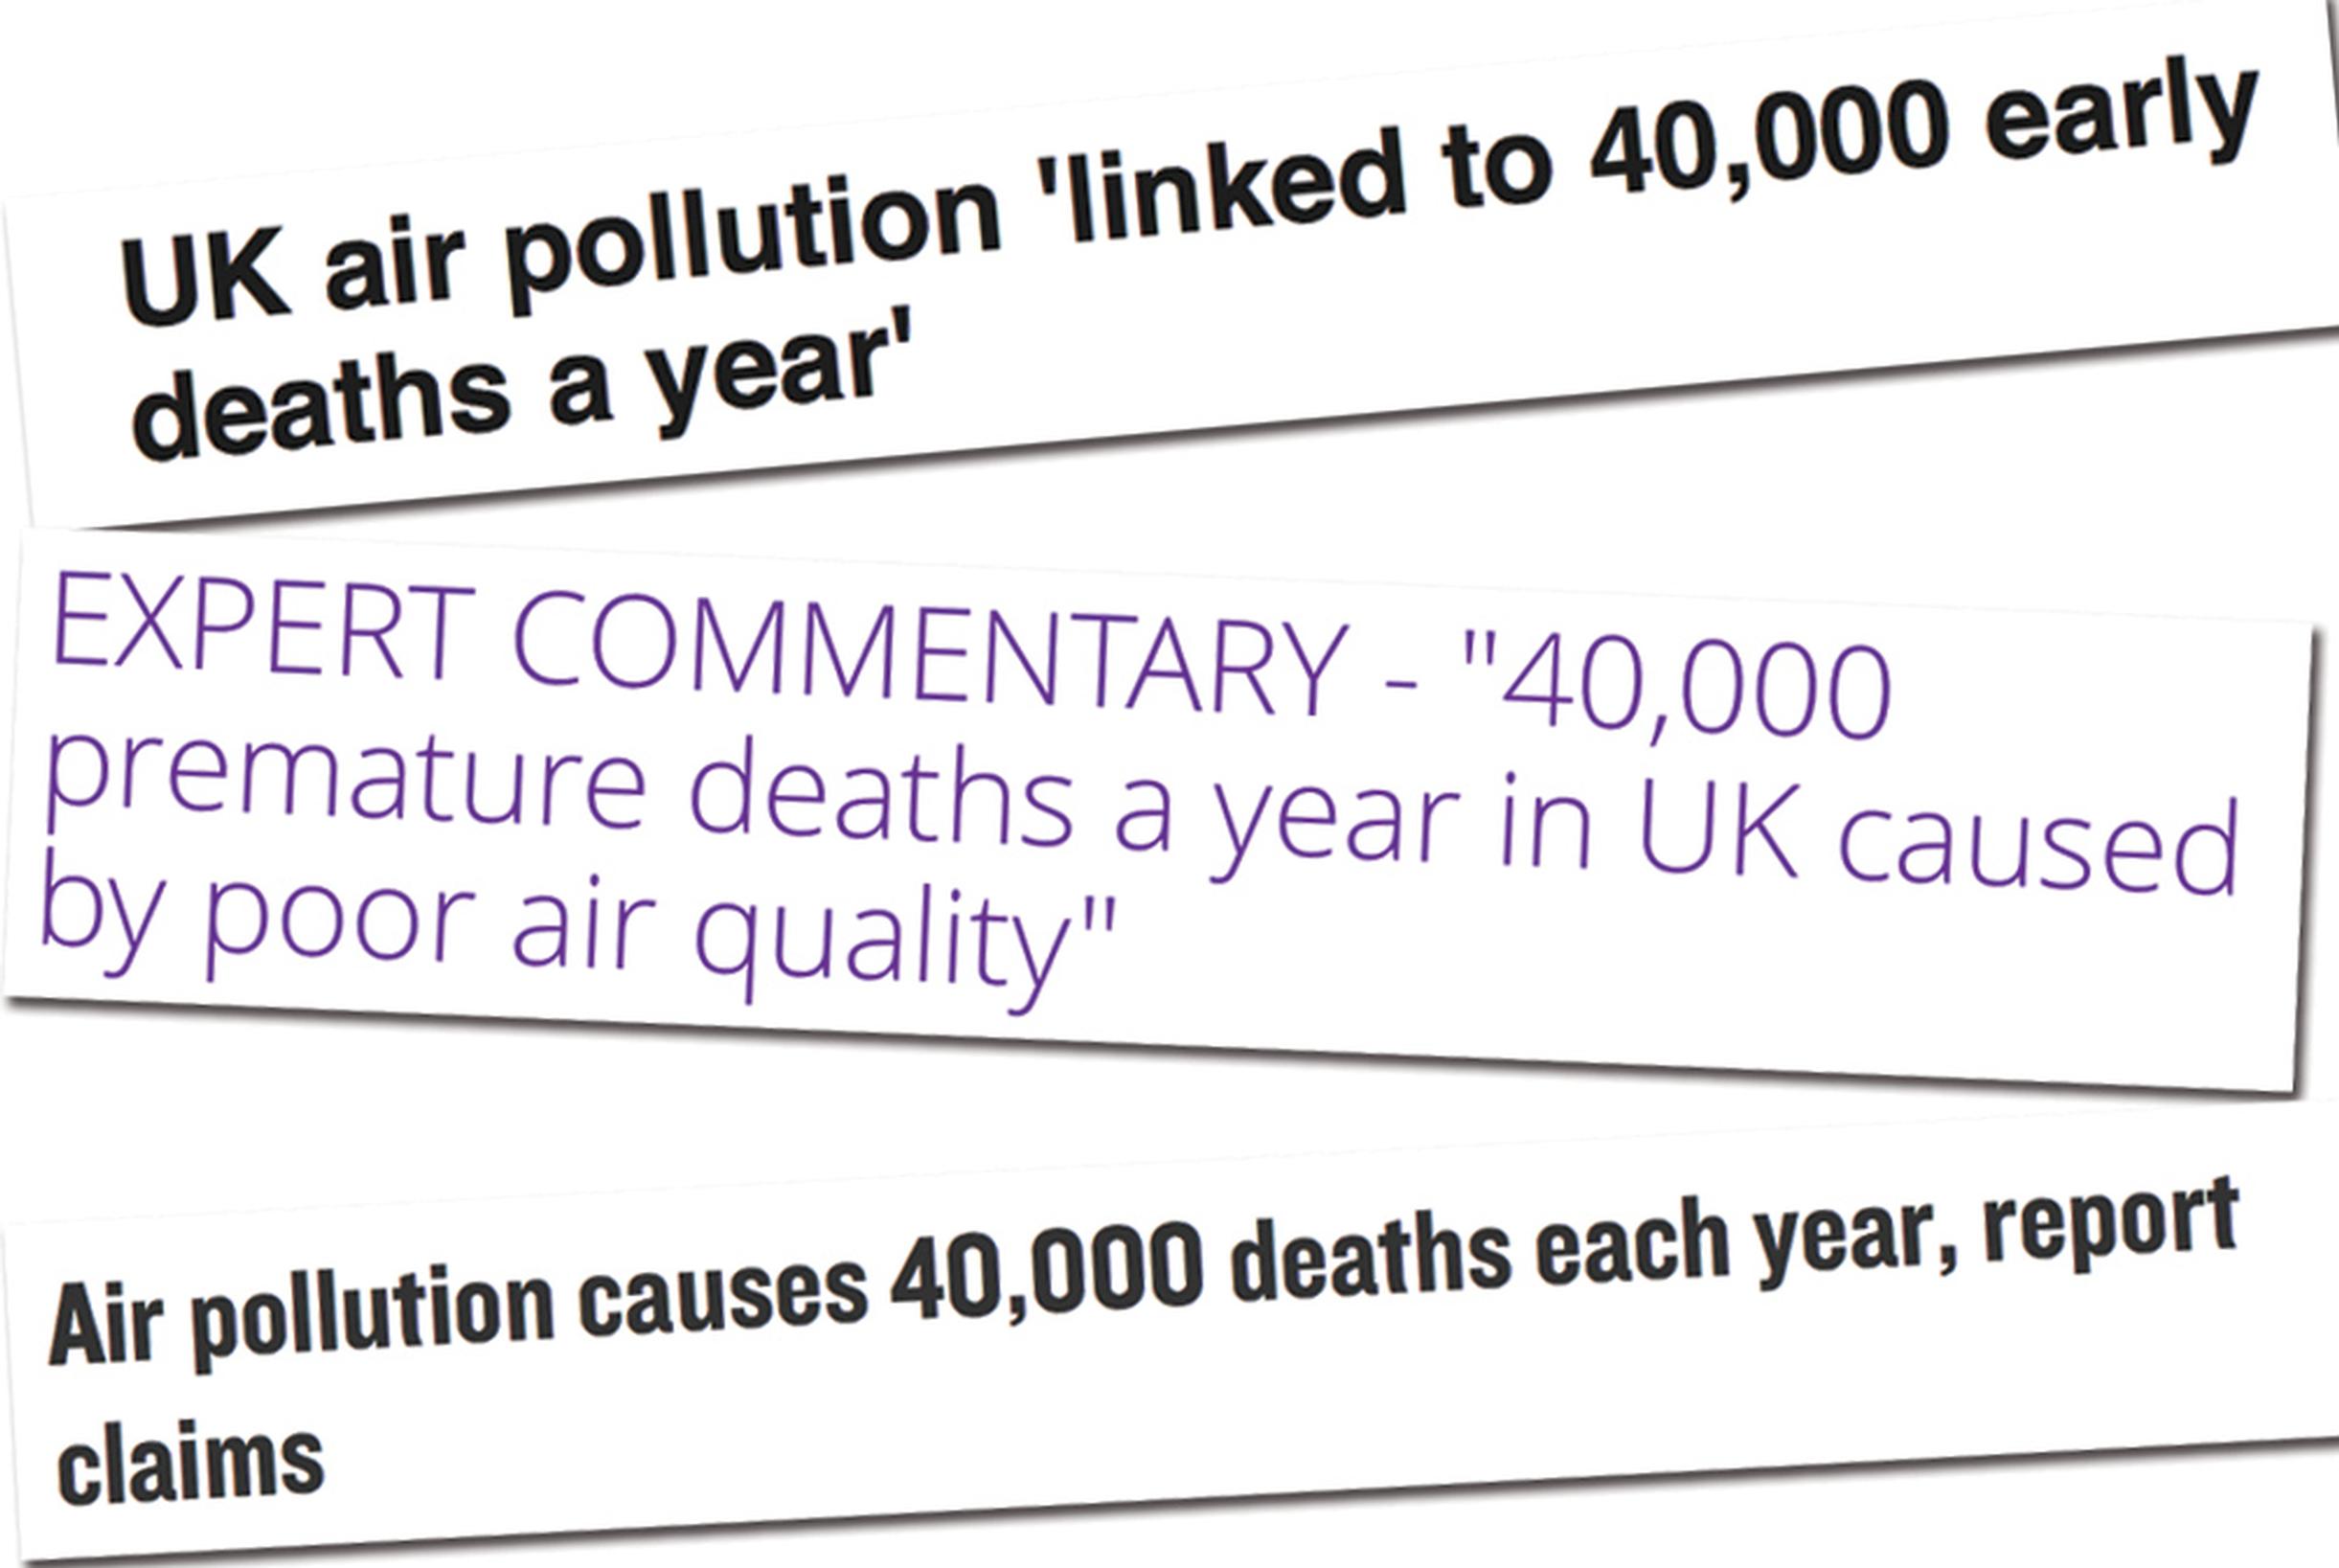 The effects of air pollution on mortality are highly uncertain, say Government advisors